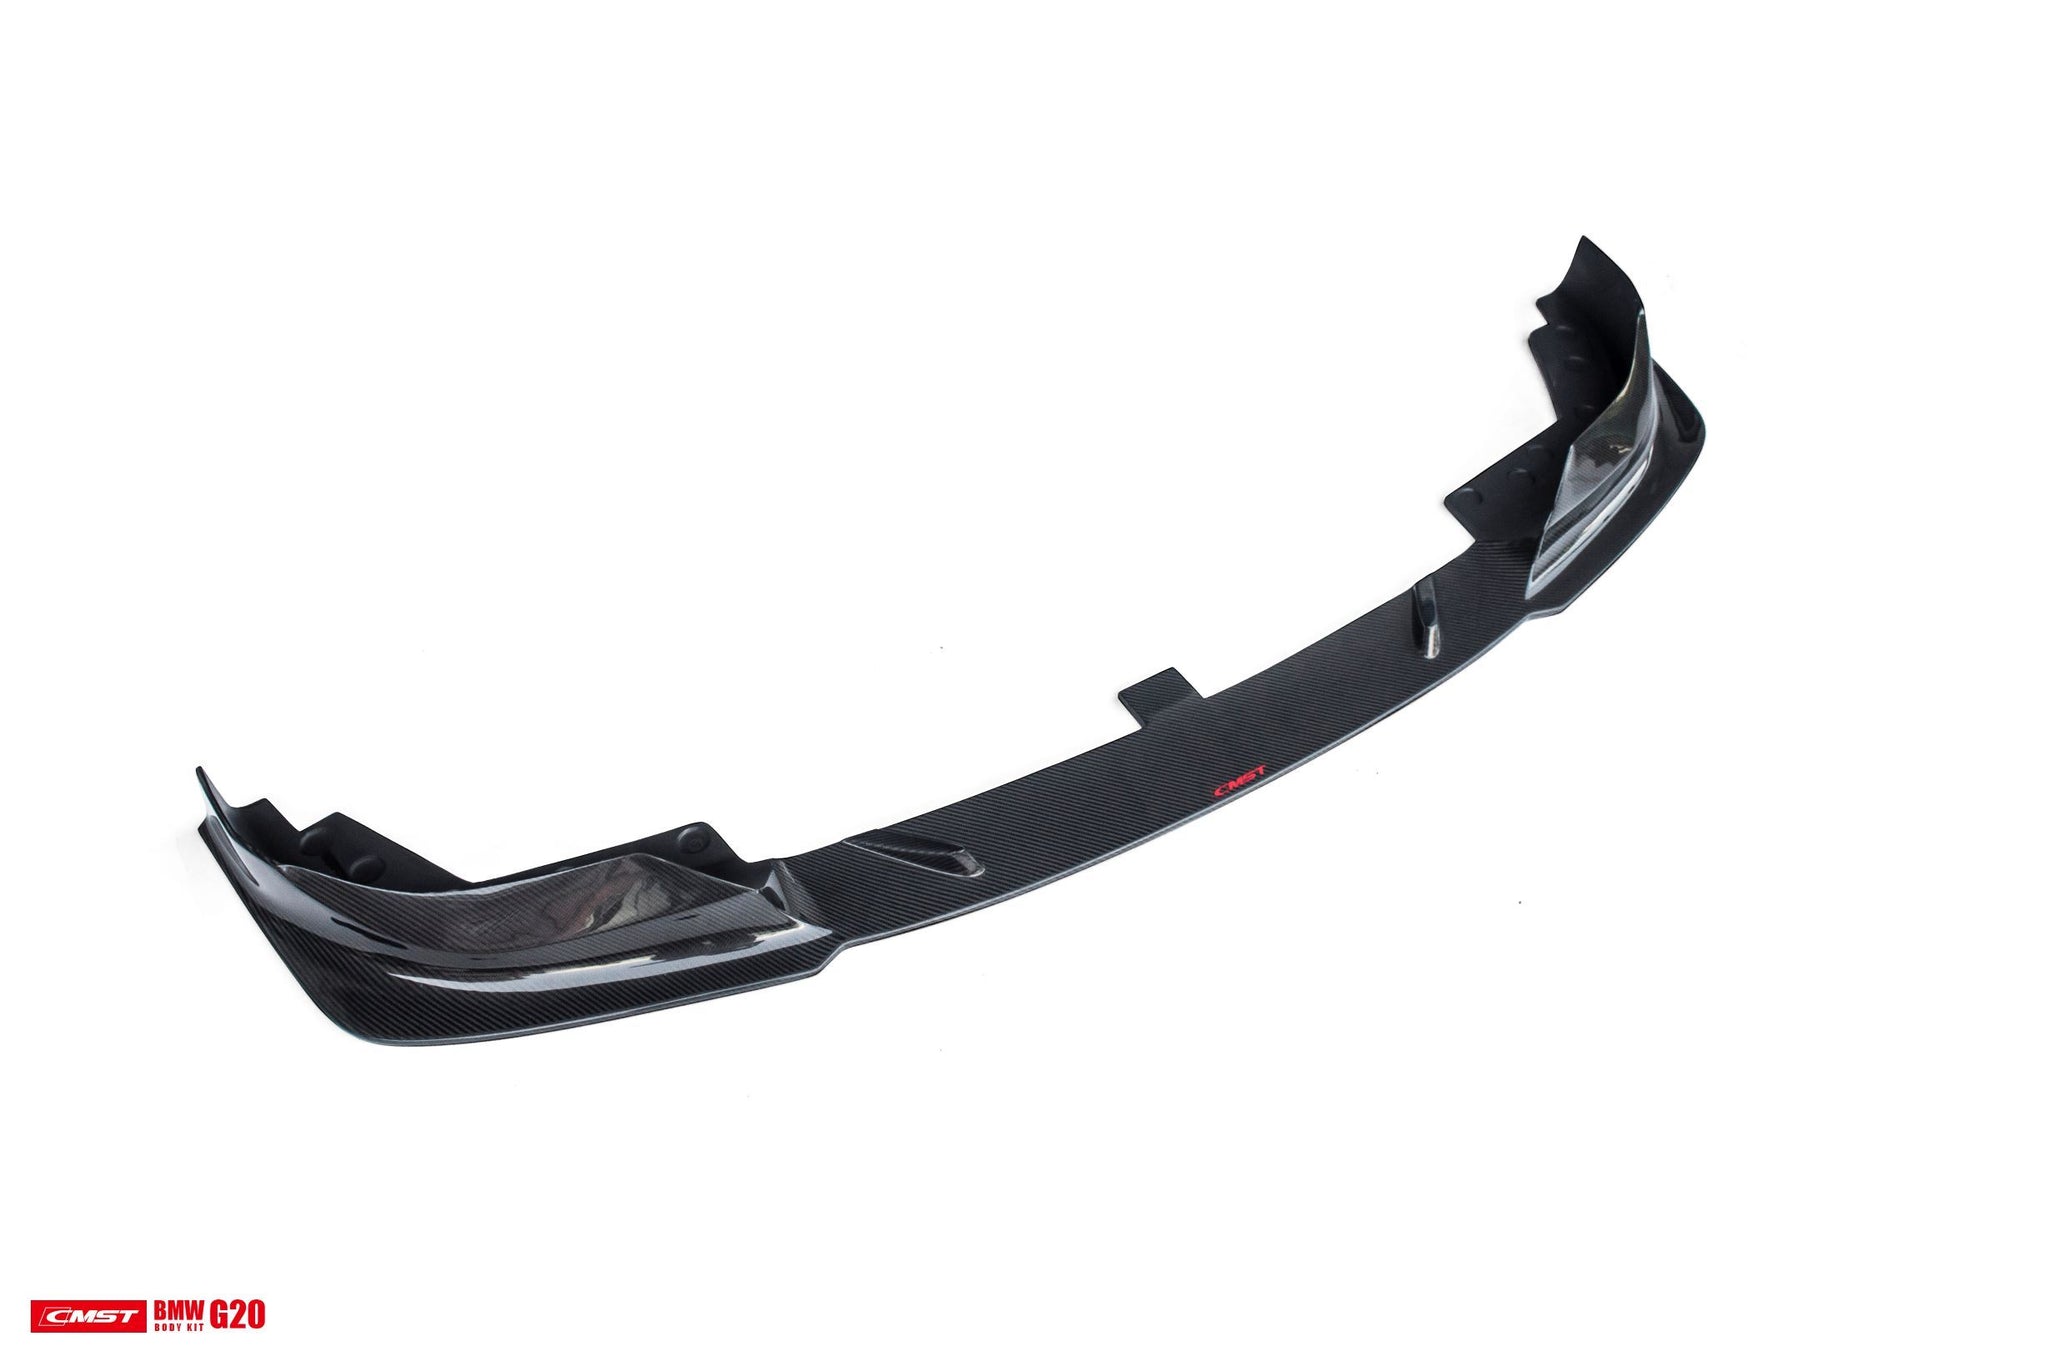 Check our price and buy CMST Carbon Fiber Body Kit set for BMW 3 Series G20 / G21!